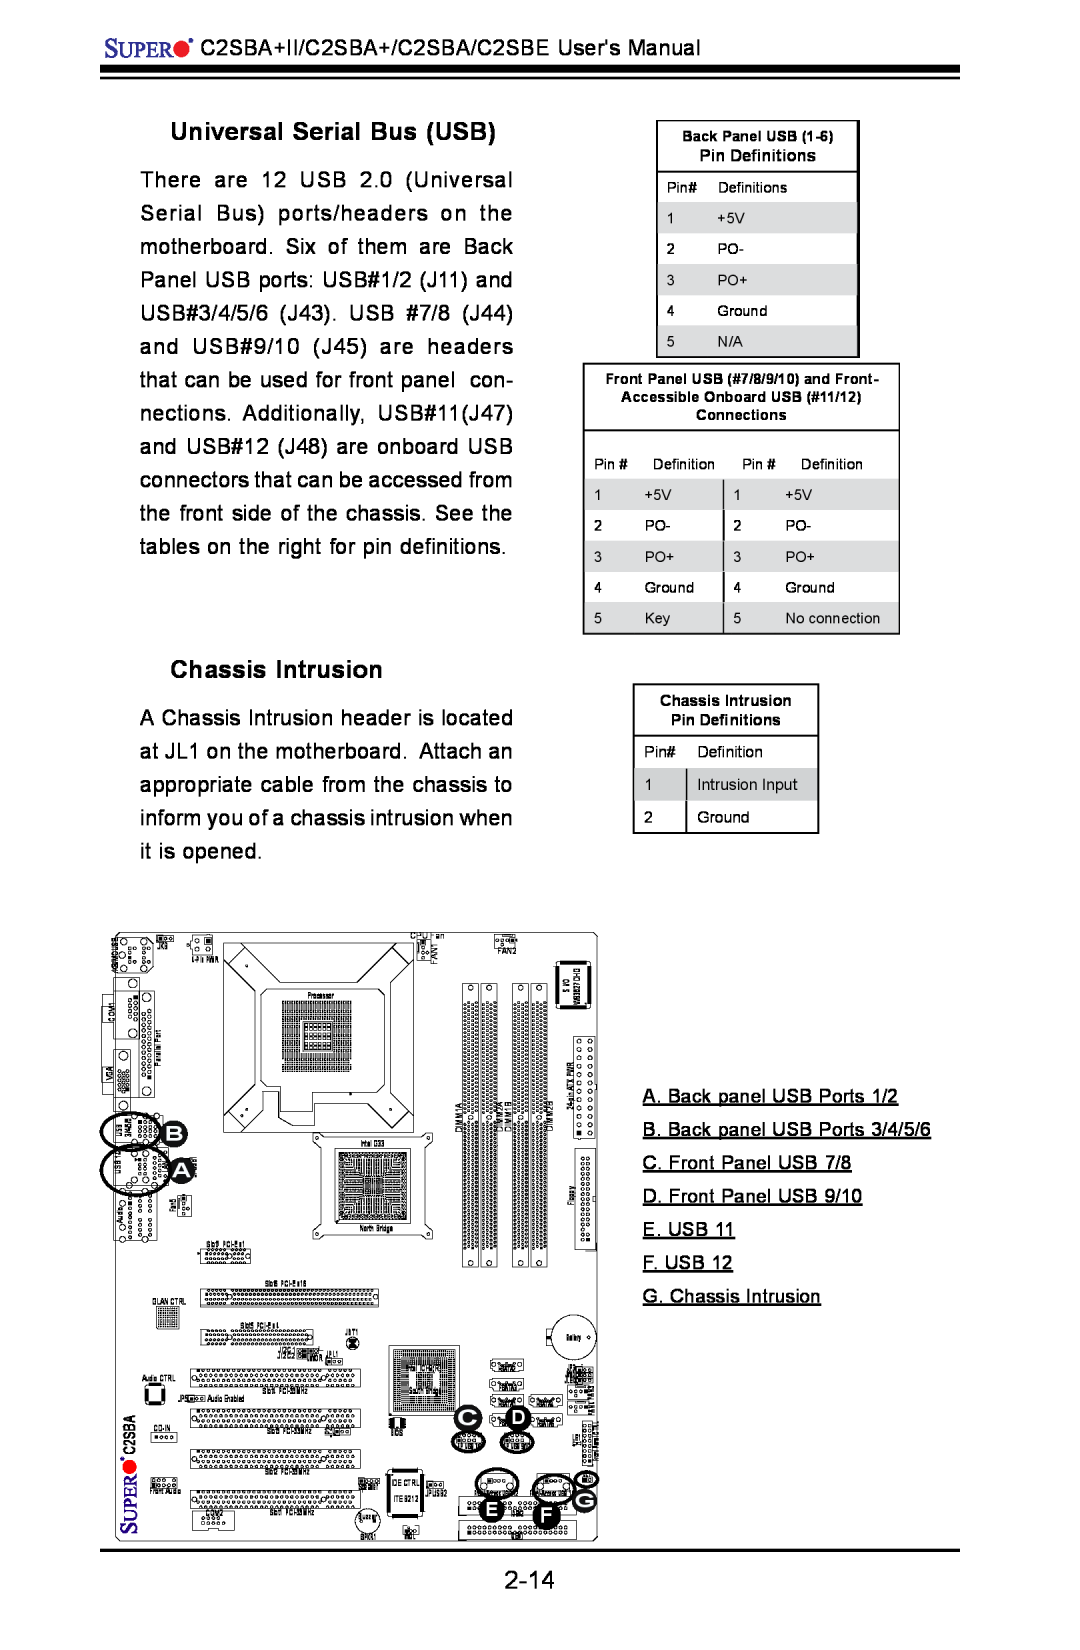 SUPER MICRO Computer C2SBA+II, C2SBE user manual Universal Serial Bus USB, Chassis Intrusion, Back Panel USB, Connections 